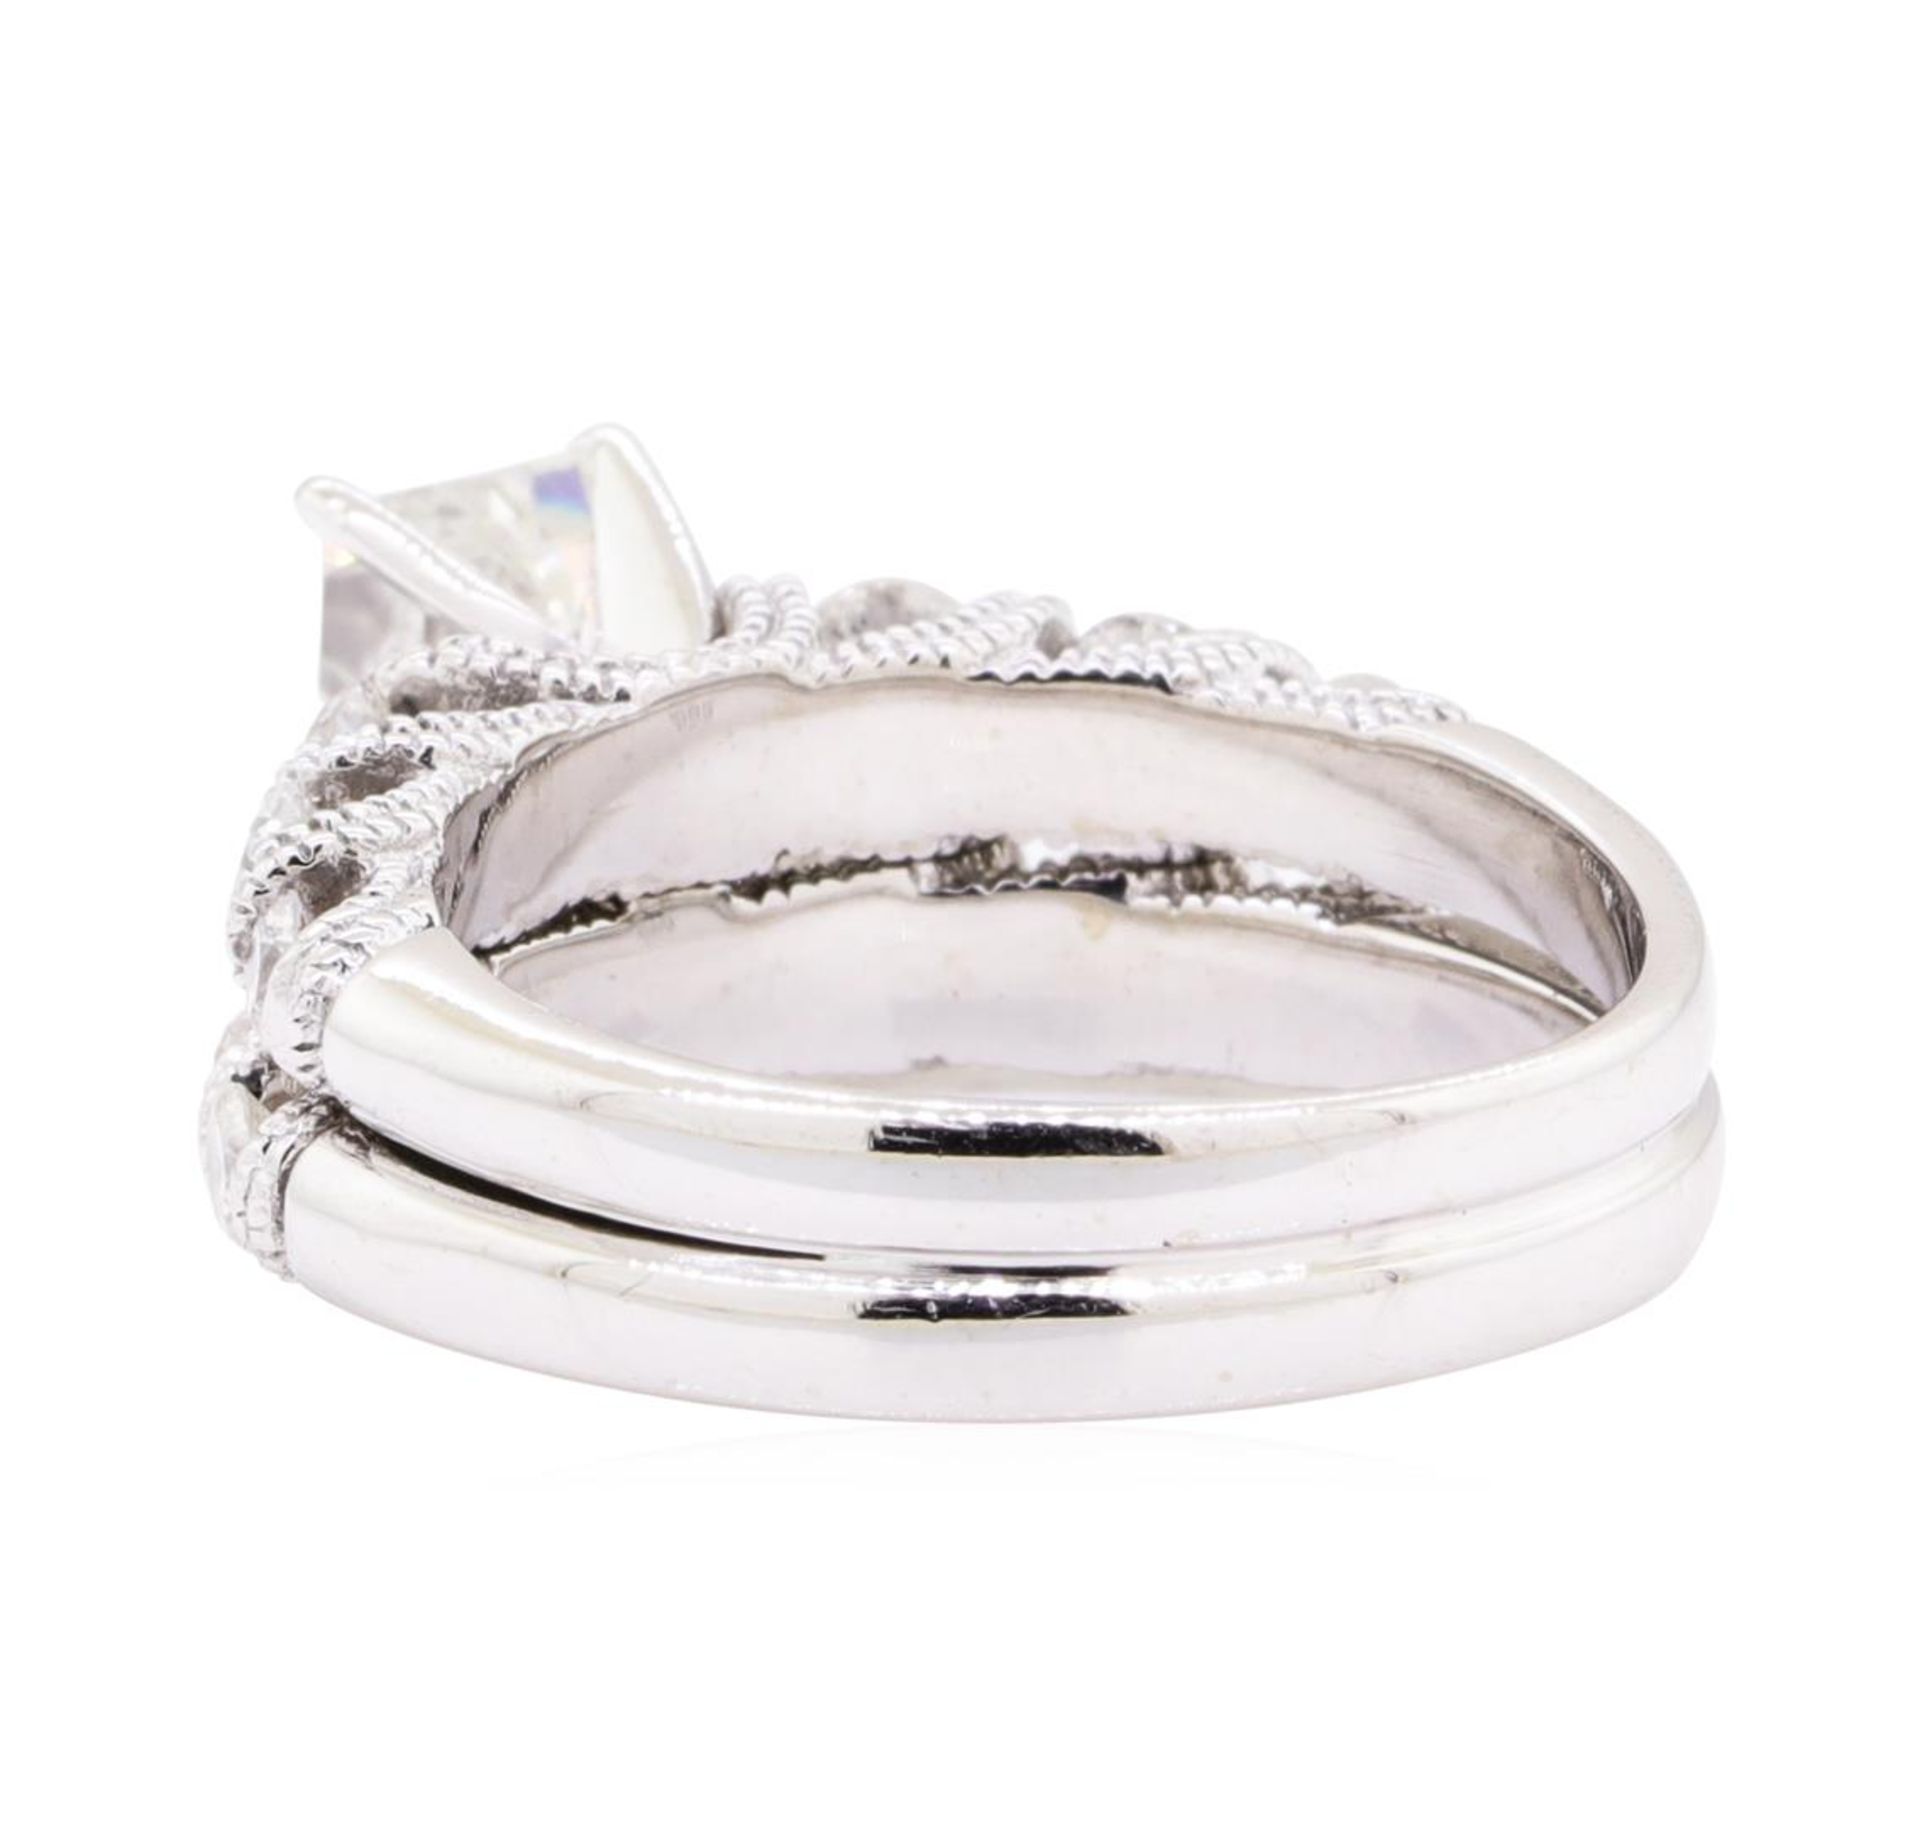 1.68 ctw Diamond Ring And Attached Band - 14KT White Gold - Image 3 of 5